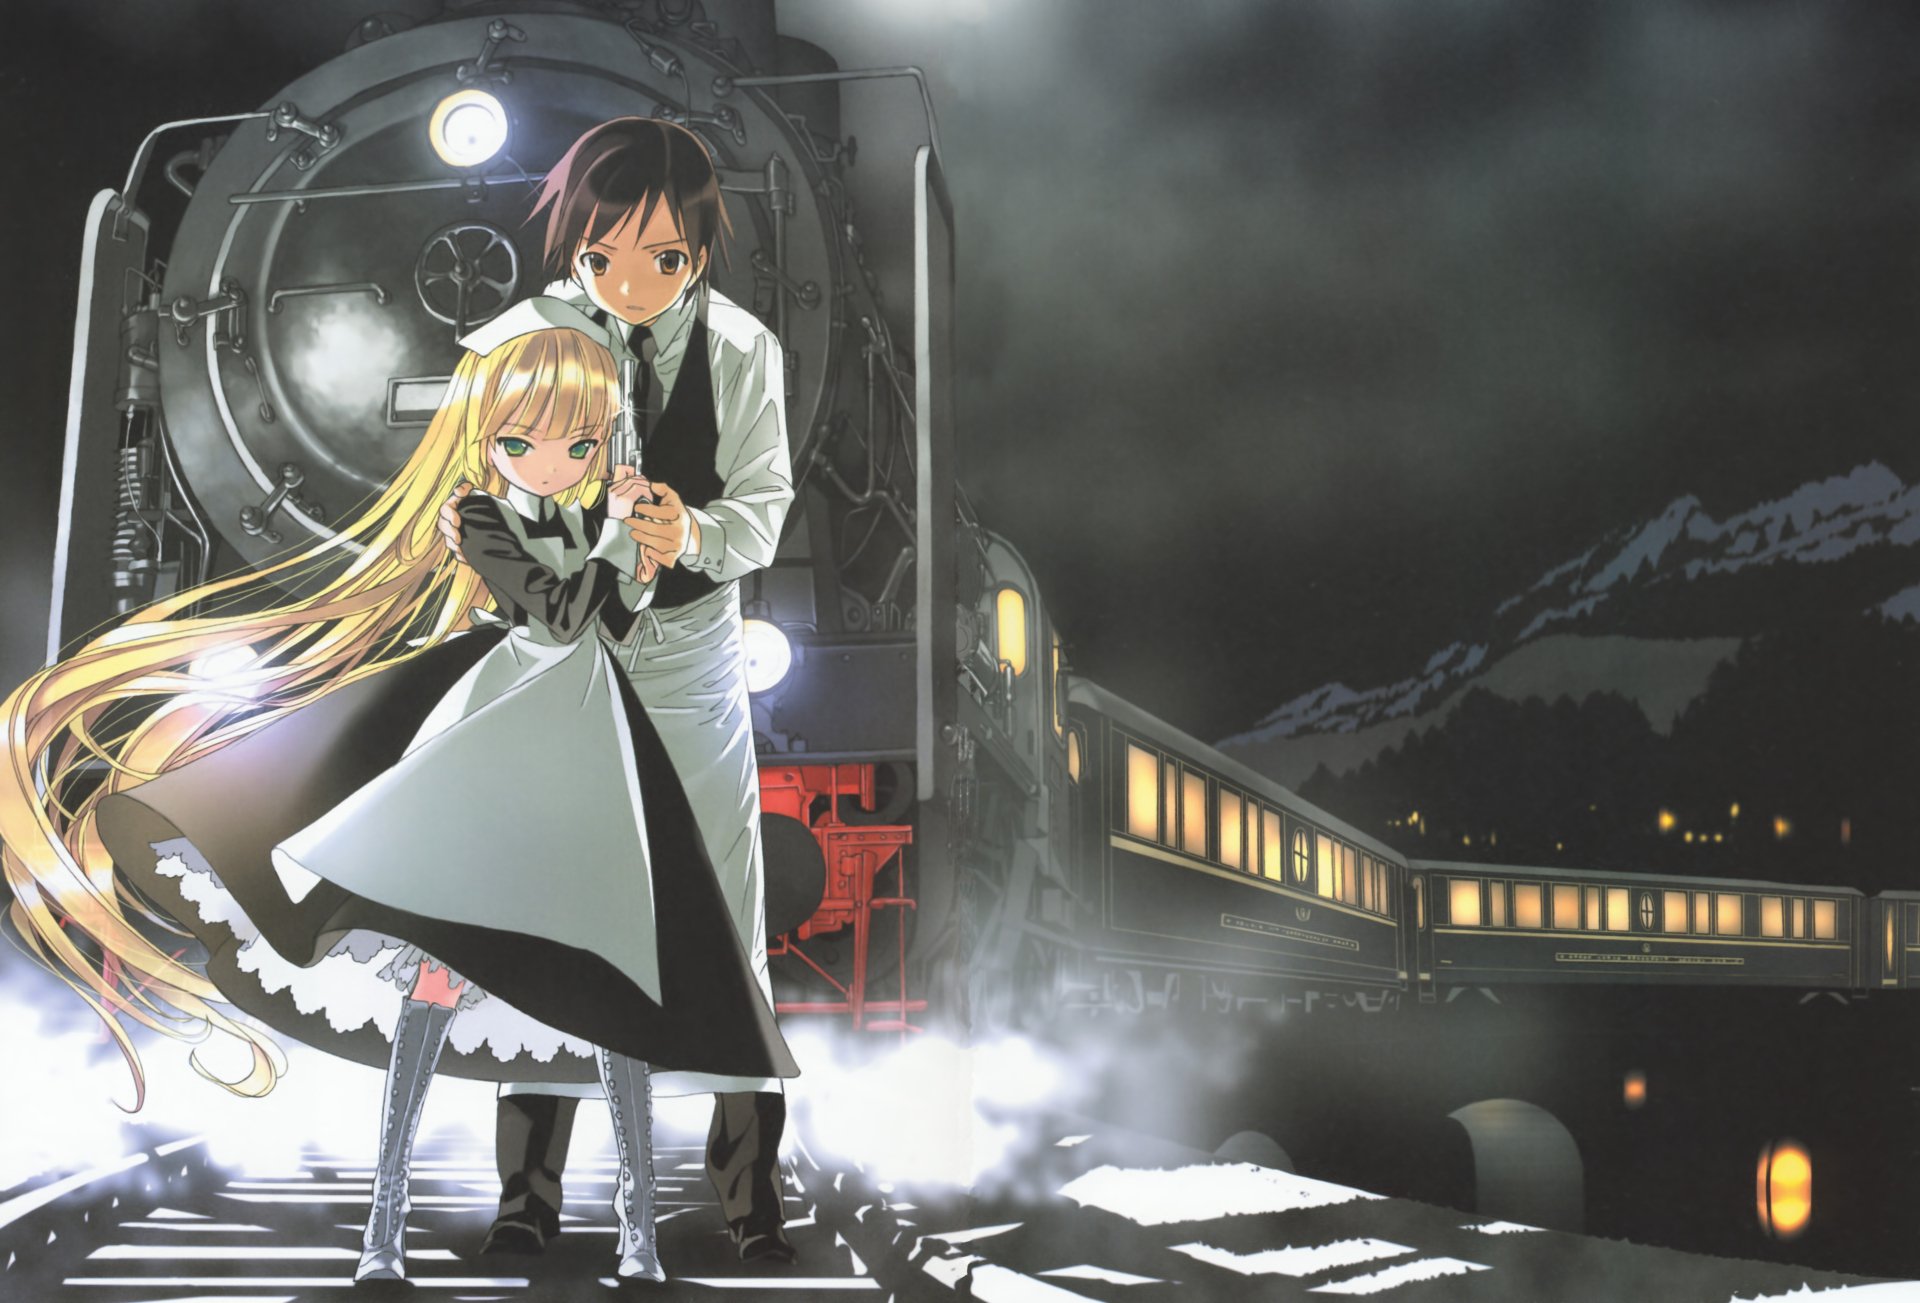 Gosick wallpapers, Anime, HQ Gosick pictures | 4K Wallpapers 2019